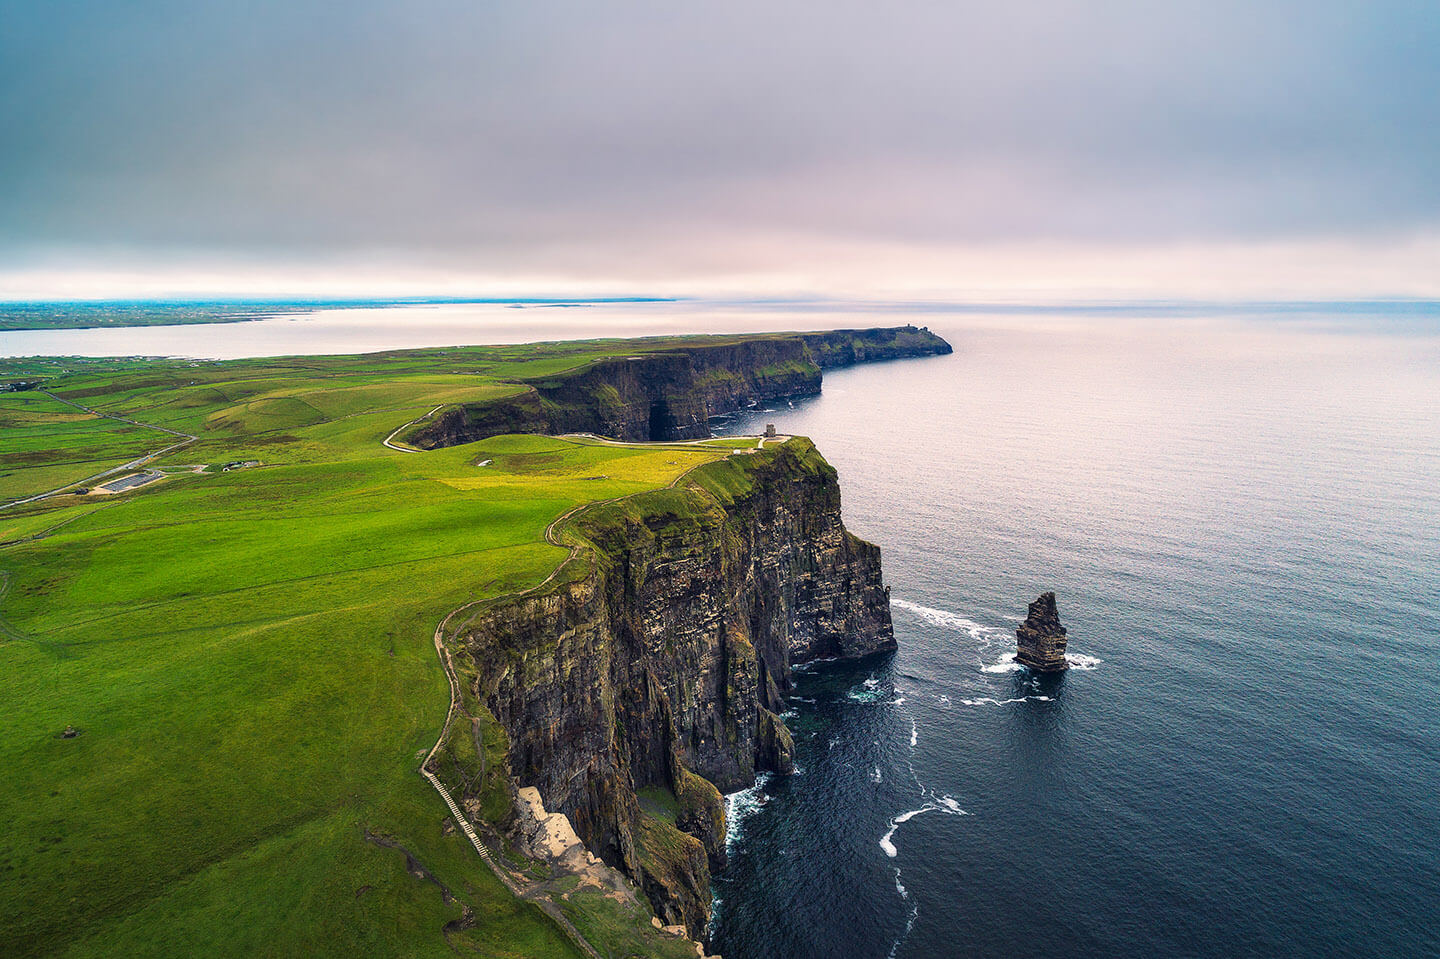 The stunning vast blue ocean on one side of the photo, and the stunning vast green land on the other side, with the cliffs of moher in Ireland dividing the two.